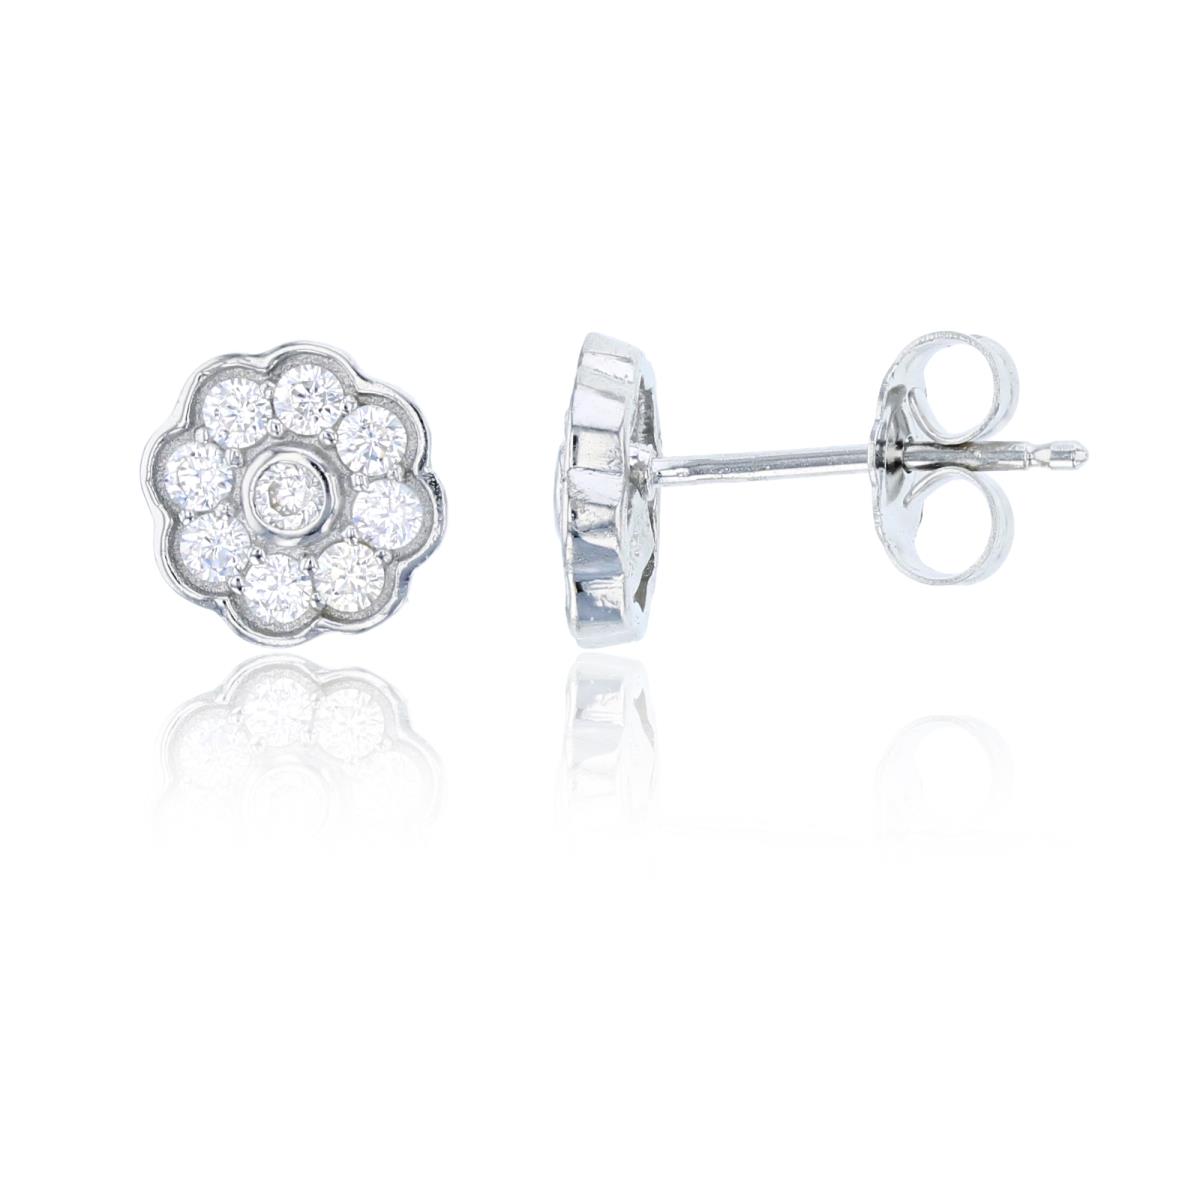 Sterling Silver 9x9mm Pave Flower Stud Earring